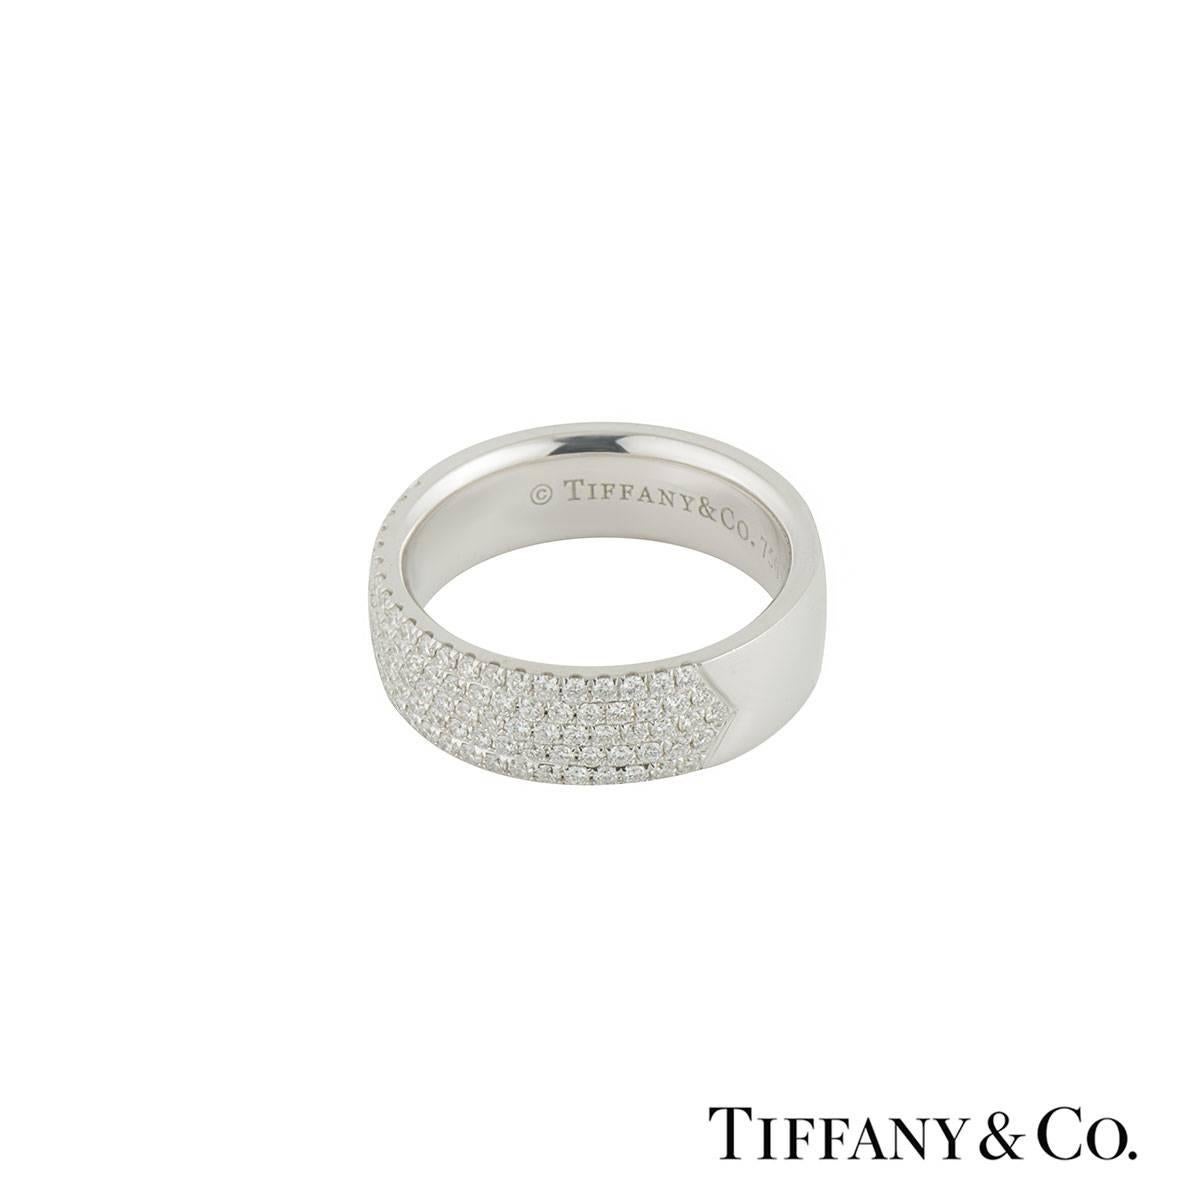 A beautiful 18k white gold Tiffany & Co. diamond band ring. The ring comprises of 5 rows of round brilliant cut diamonds half way around the band with a total weight of 0.76ct, G colour and VS clarity. The ring is a 6mm court fit style band